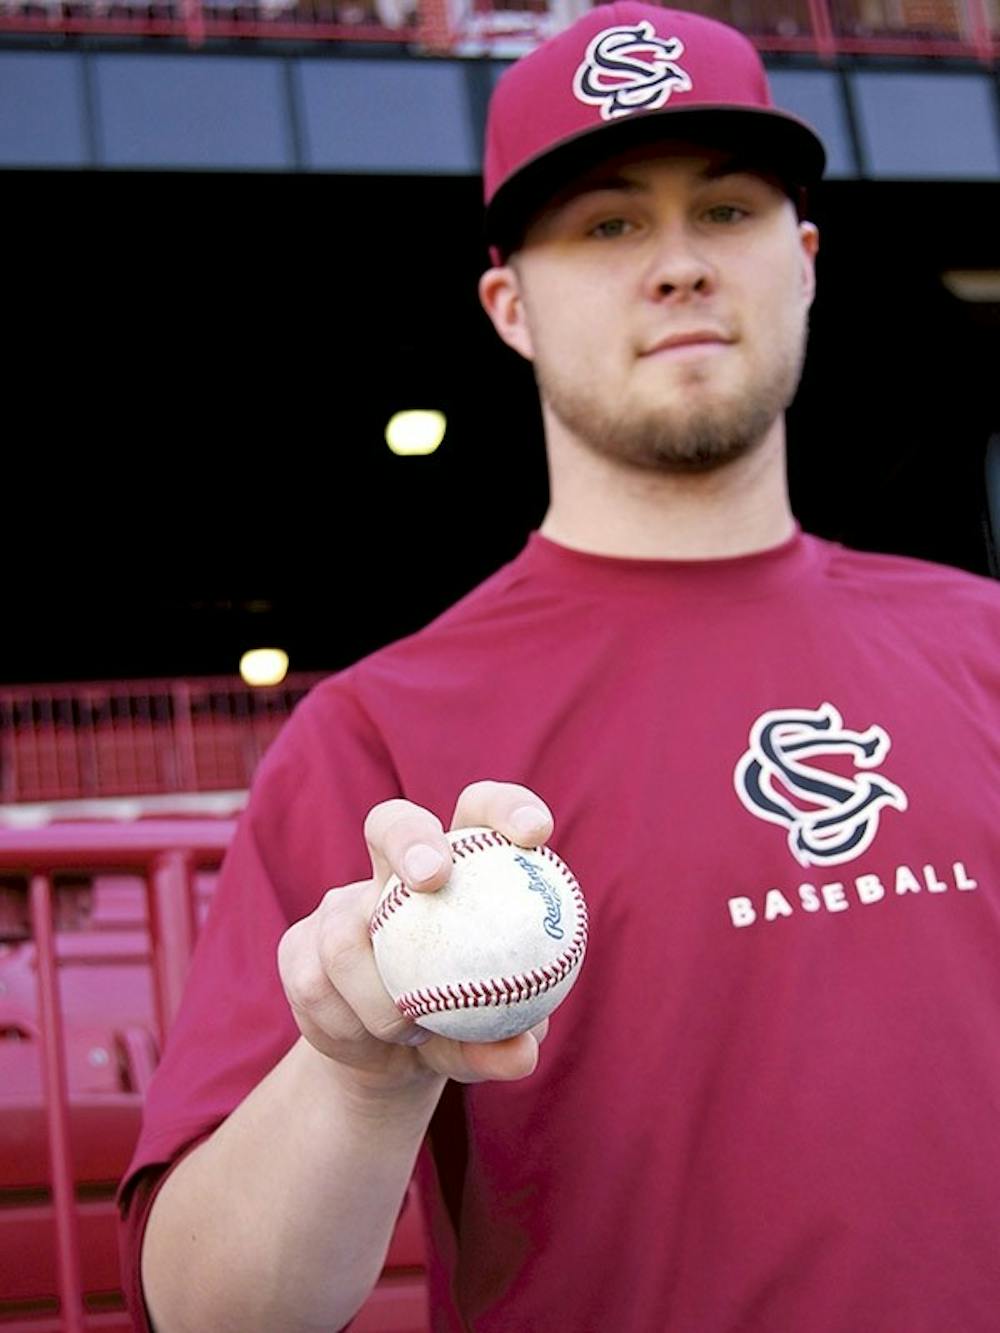 Gamecocks relief pitcher Evan Beal shows how to hold a four-seam fastball –his favorite pitch– which he can throw over 90 mph. Beal admits to being picky about the feel of the baseballs he throws.